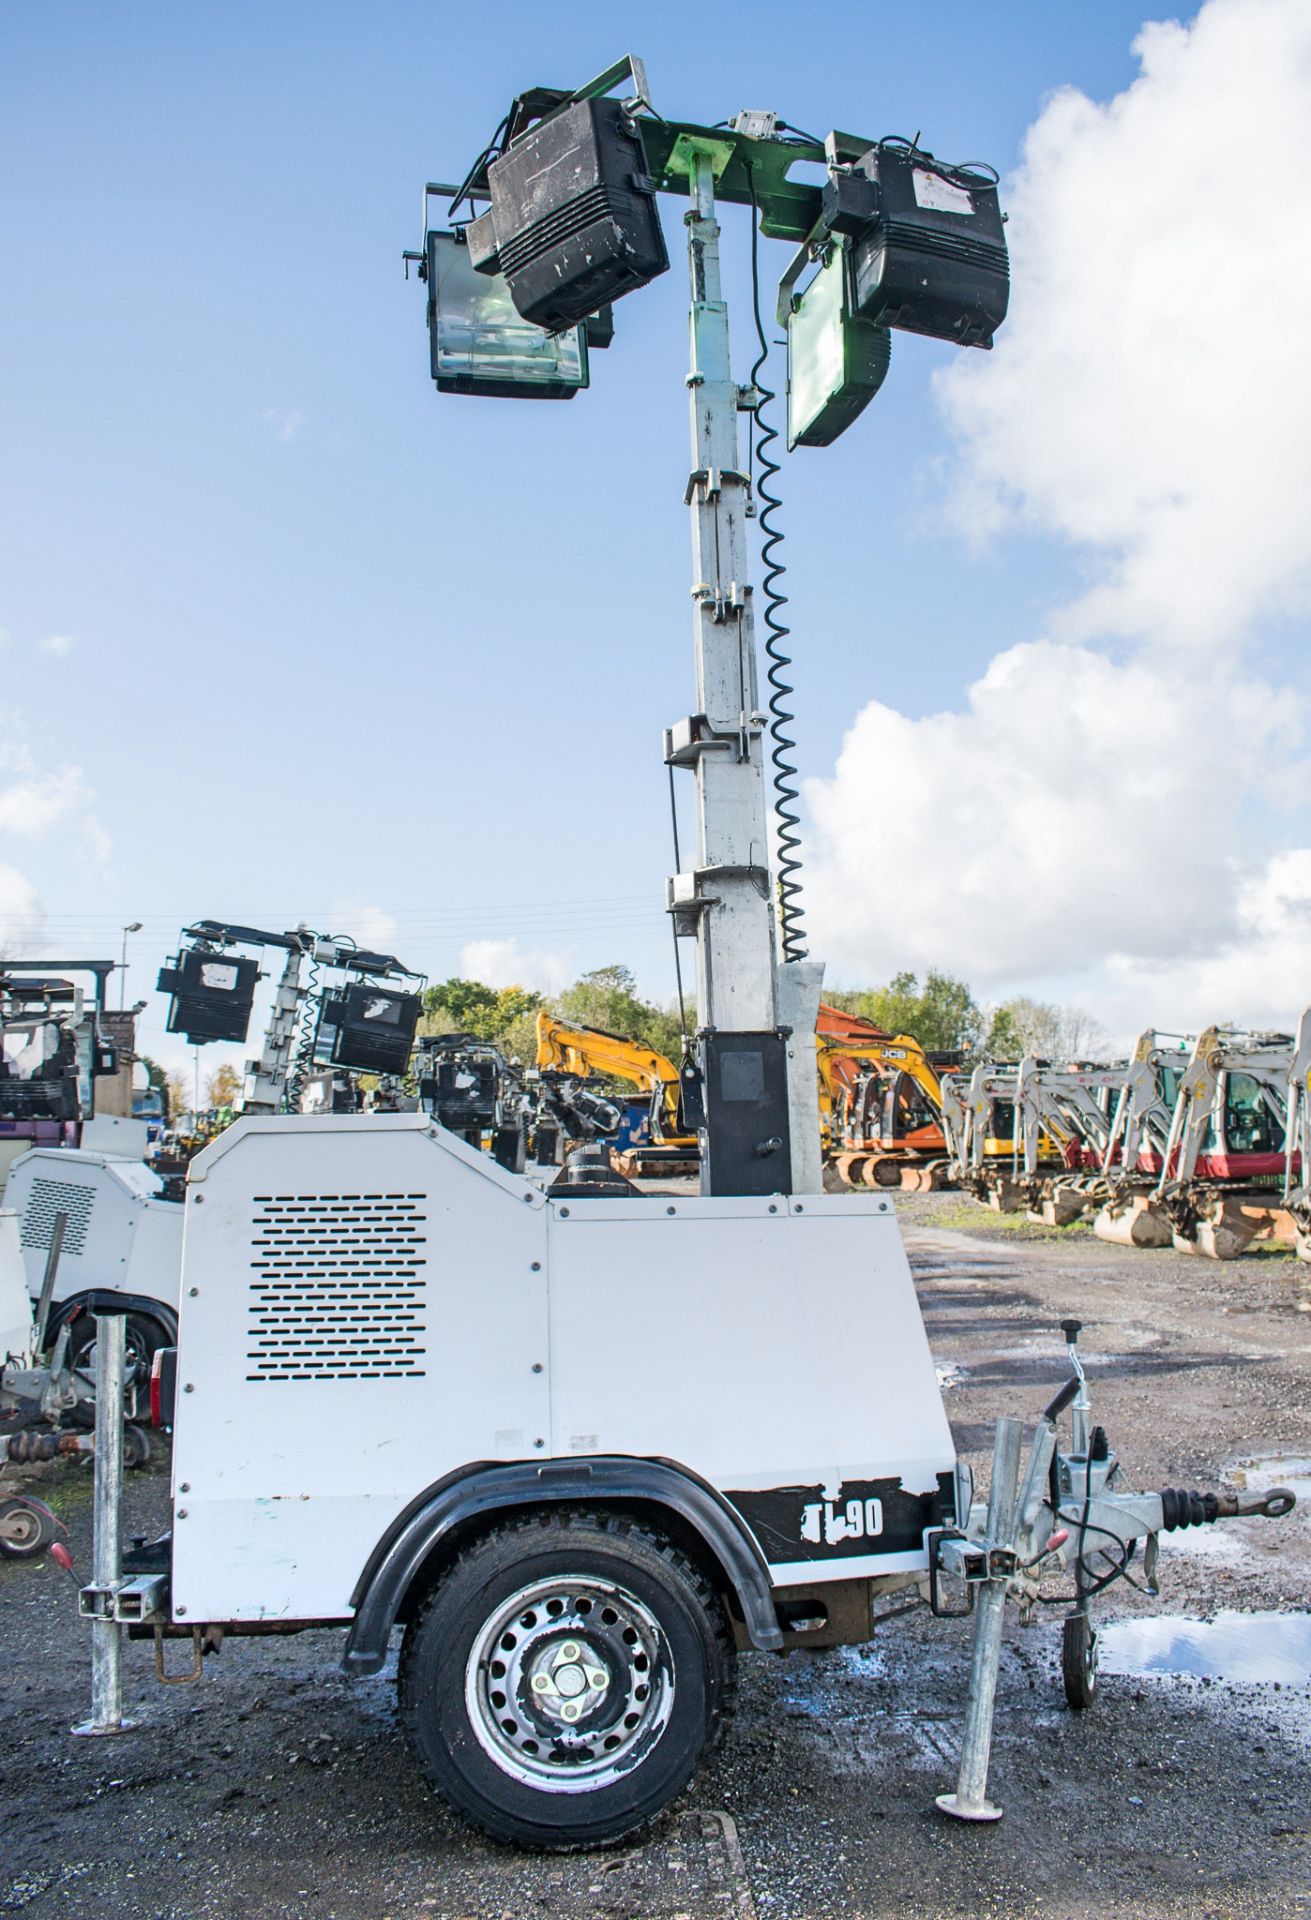 SMC TL-90 diesel driven mobile lighting tower  Year: 2012 S/N: 129657 Recorded hours: 5835 A593319 - Image 6 of 8